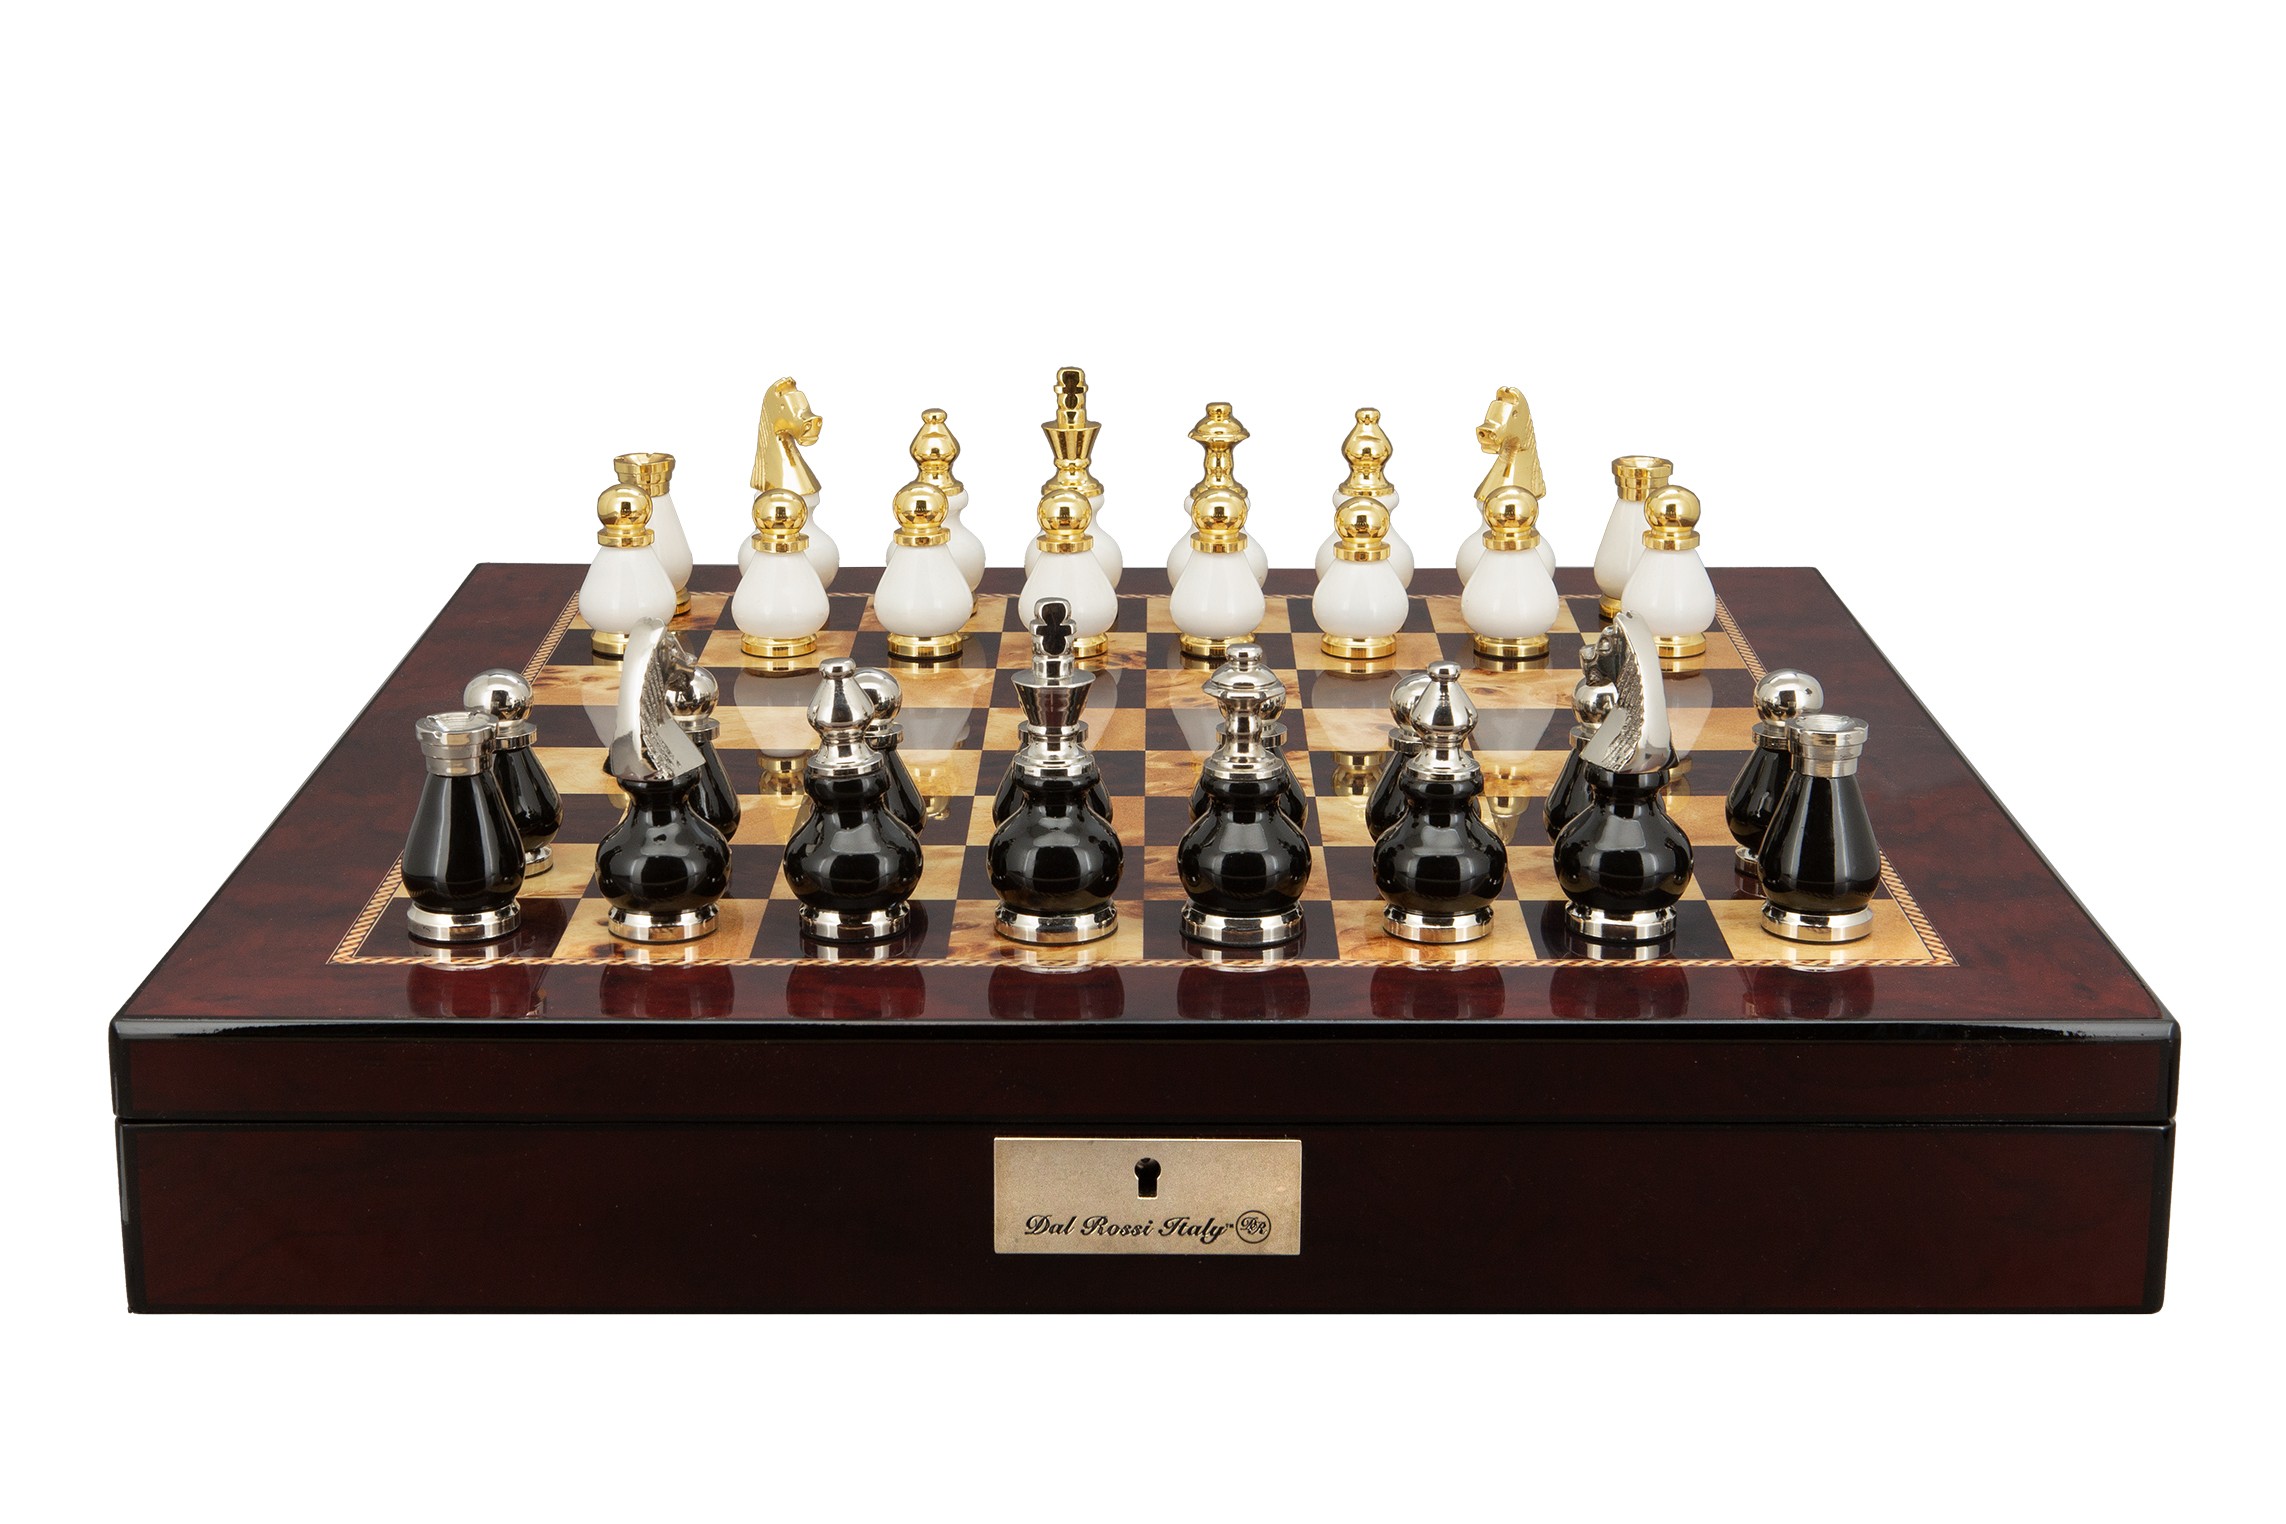 Dal Rossi Italy, Black and White with Gold and Silver Tops and Bottoms Chessmen 90mm on a Mahogany Finish Shiny Chess Box with Compartments 20"